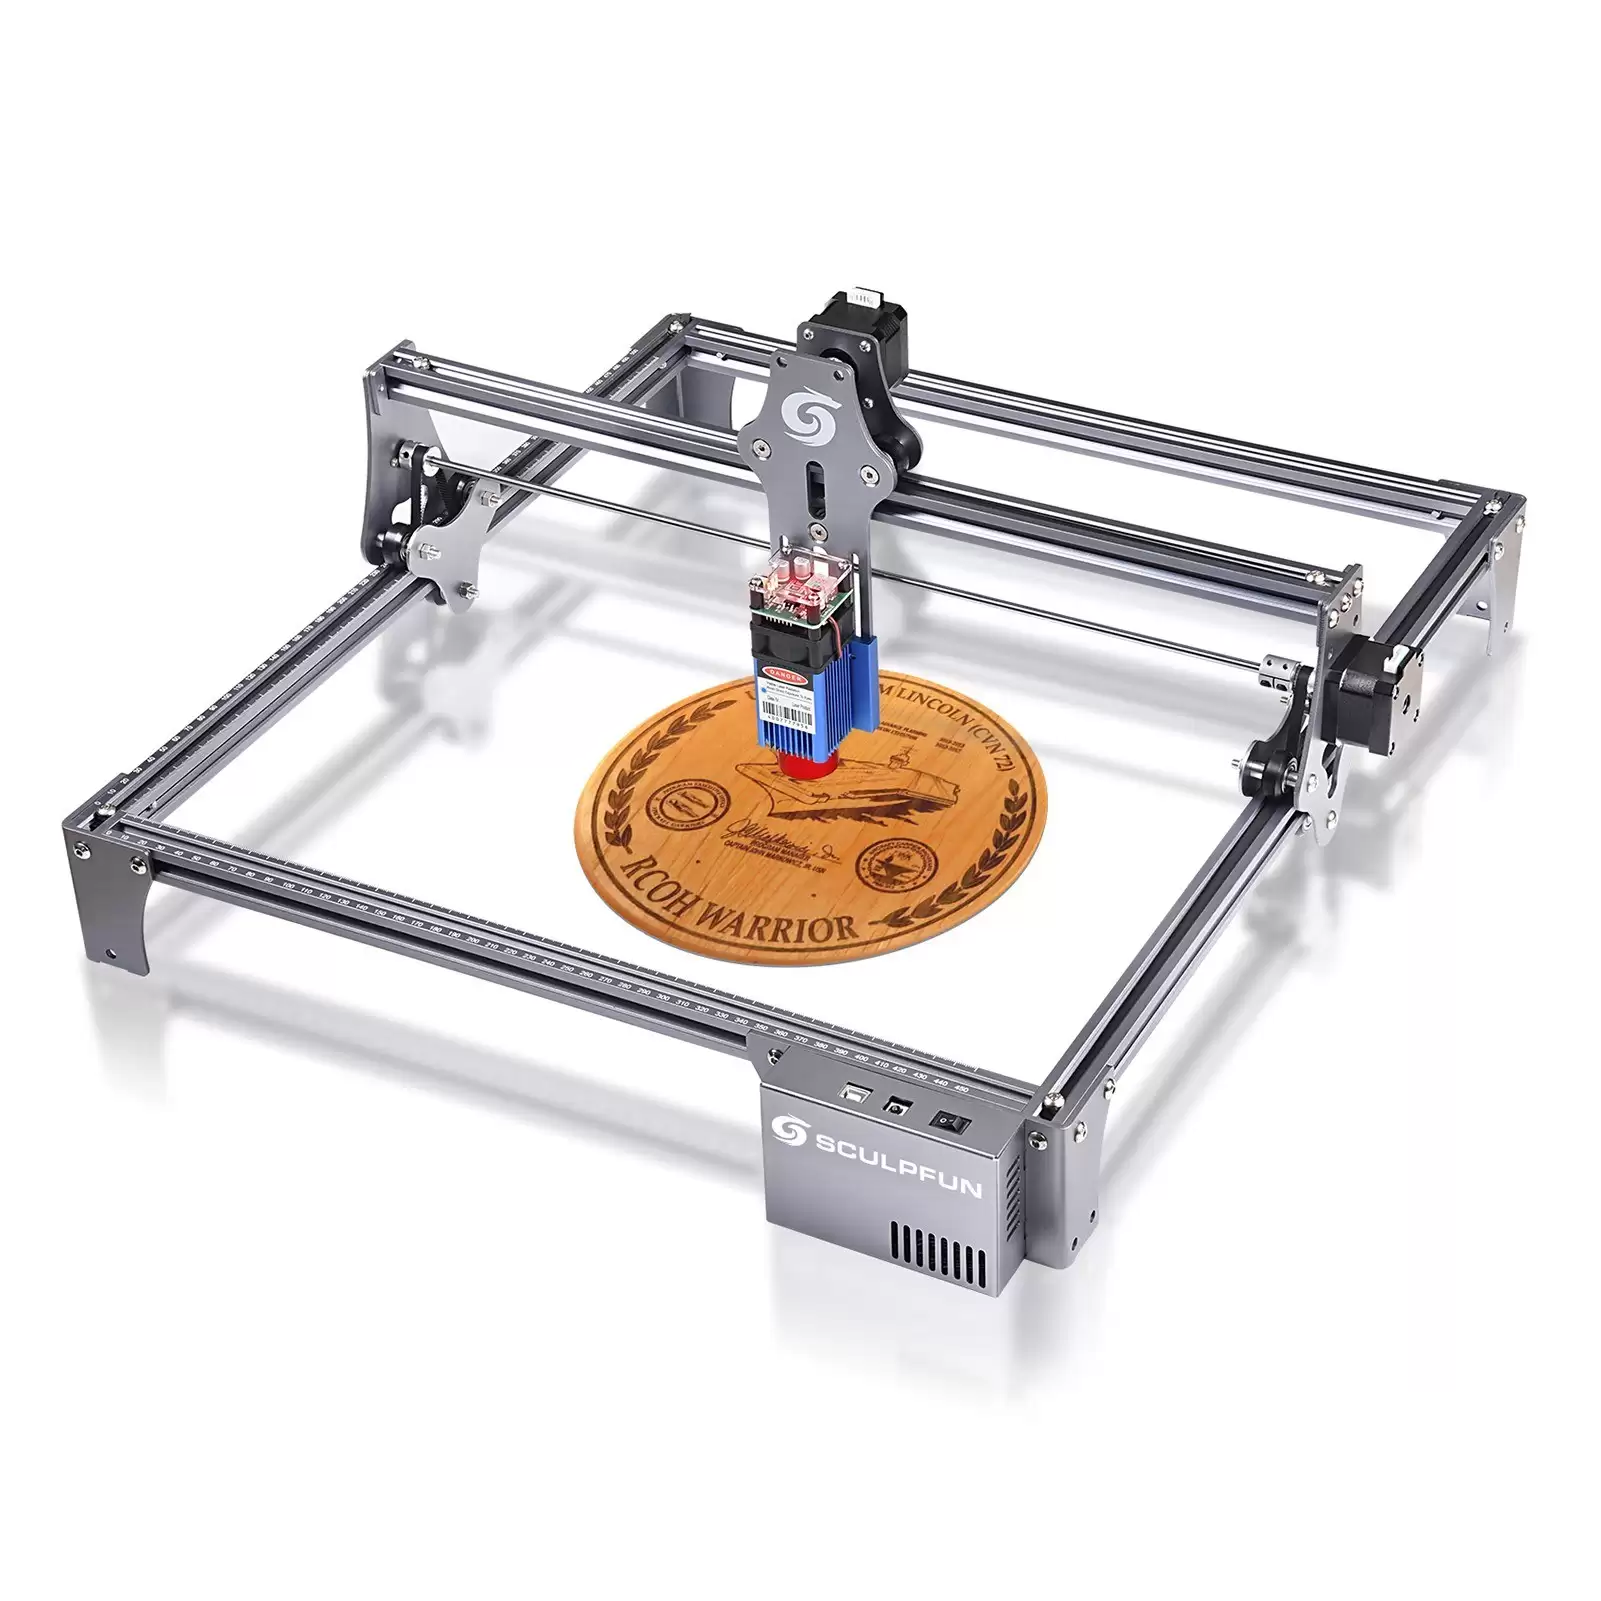 Get Extra $161.57 Discount On Sculpfun S6 30w Laser Engraver At Cafago